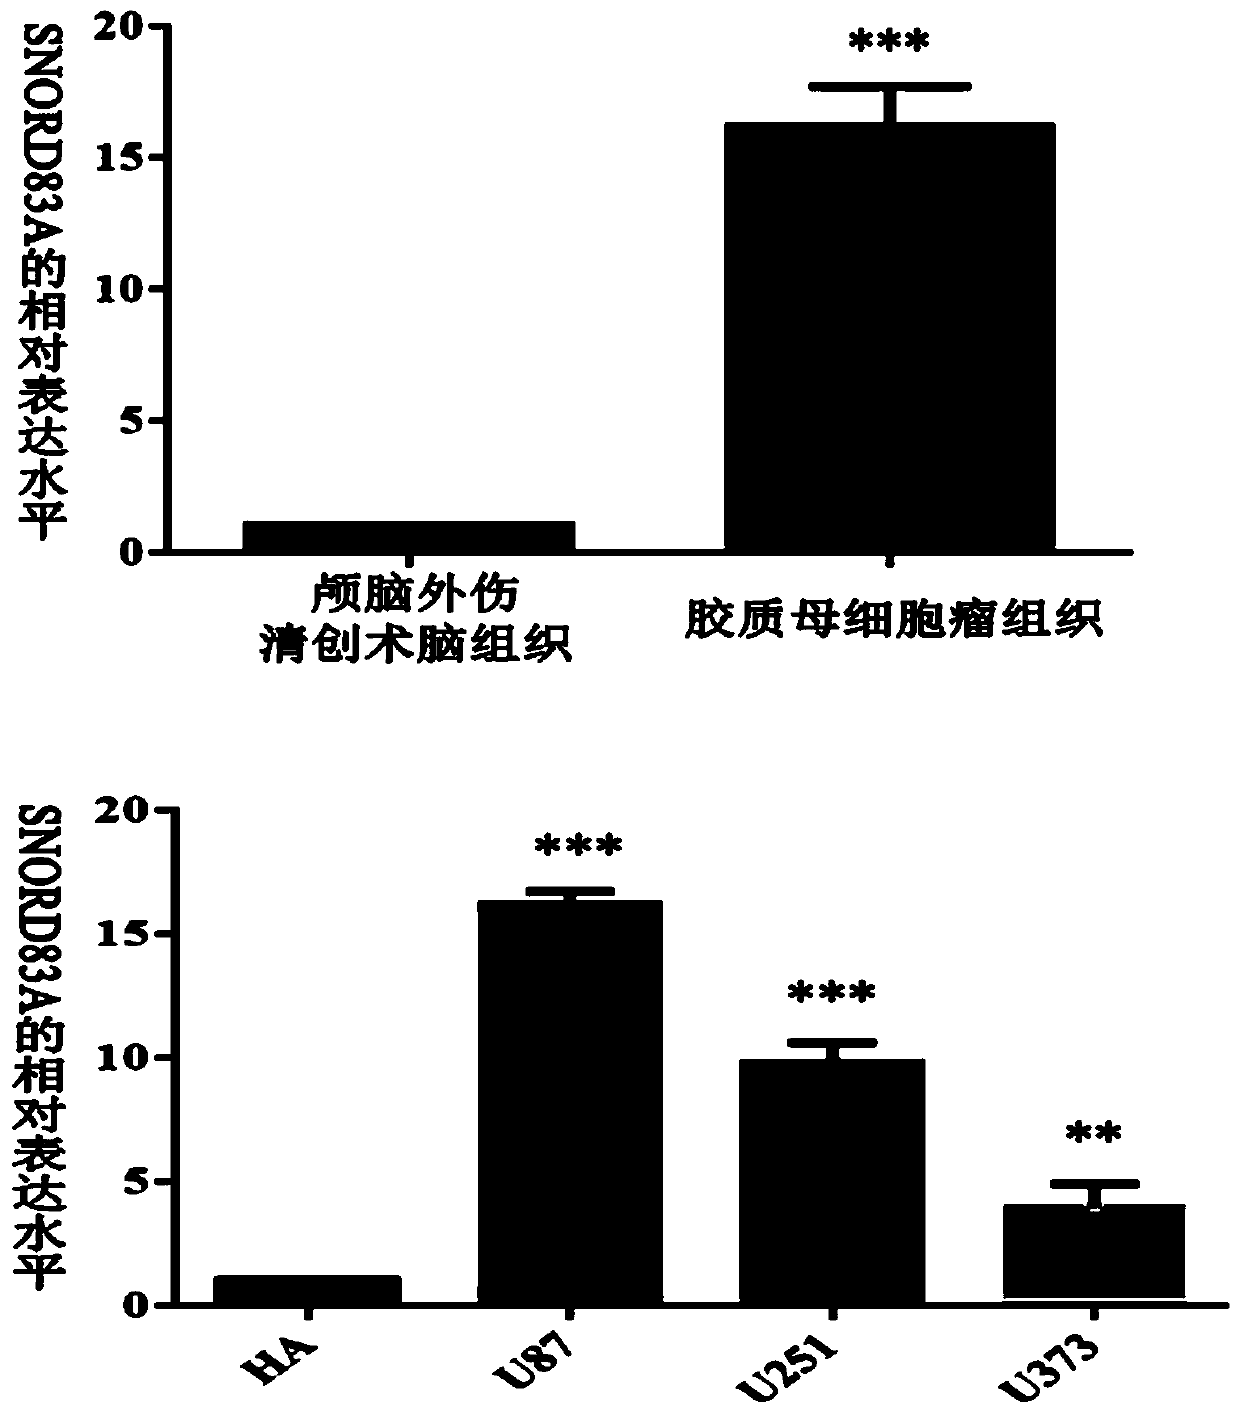 Targeted inhibitor of SNORD83A gene and application of targeted inhibitor